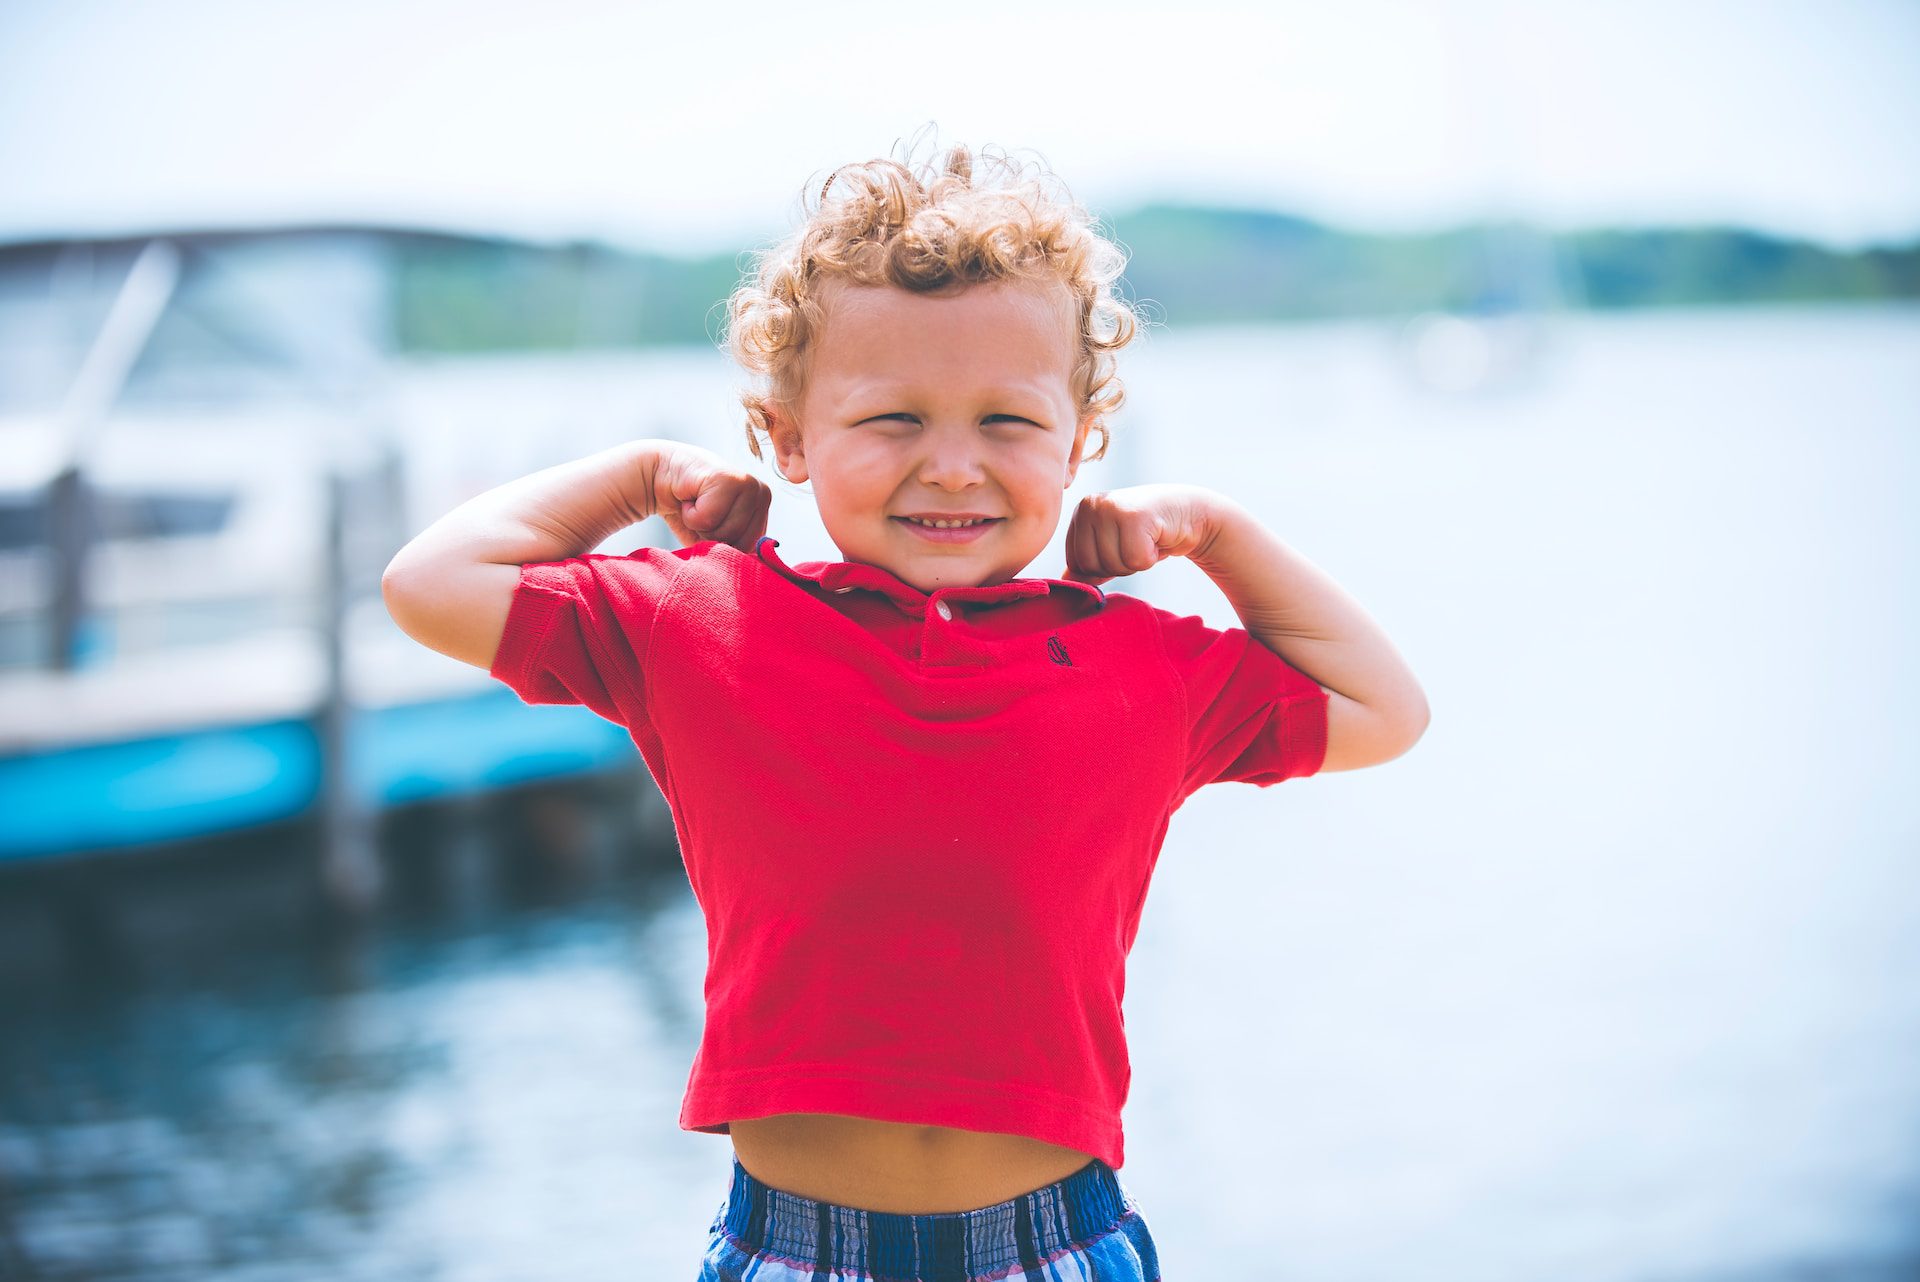 little boy in red shirt flexing his muscles in front of a lake